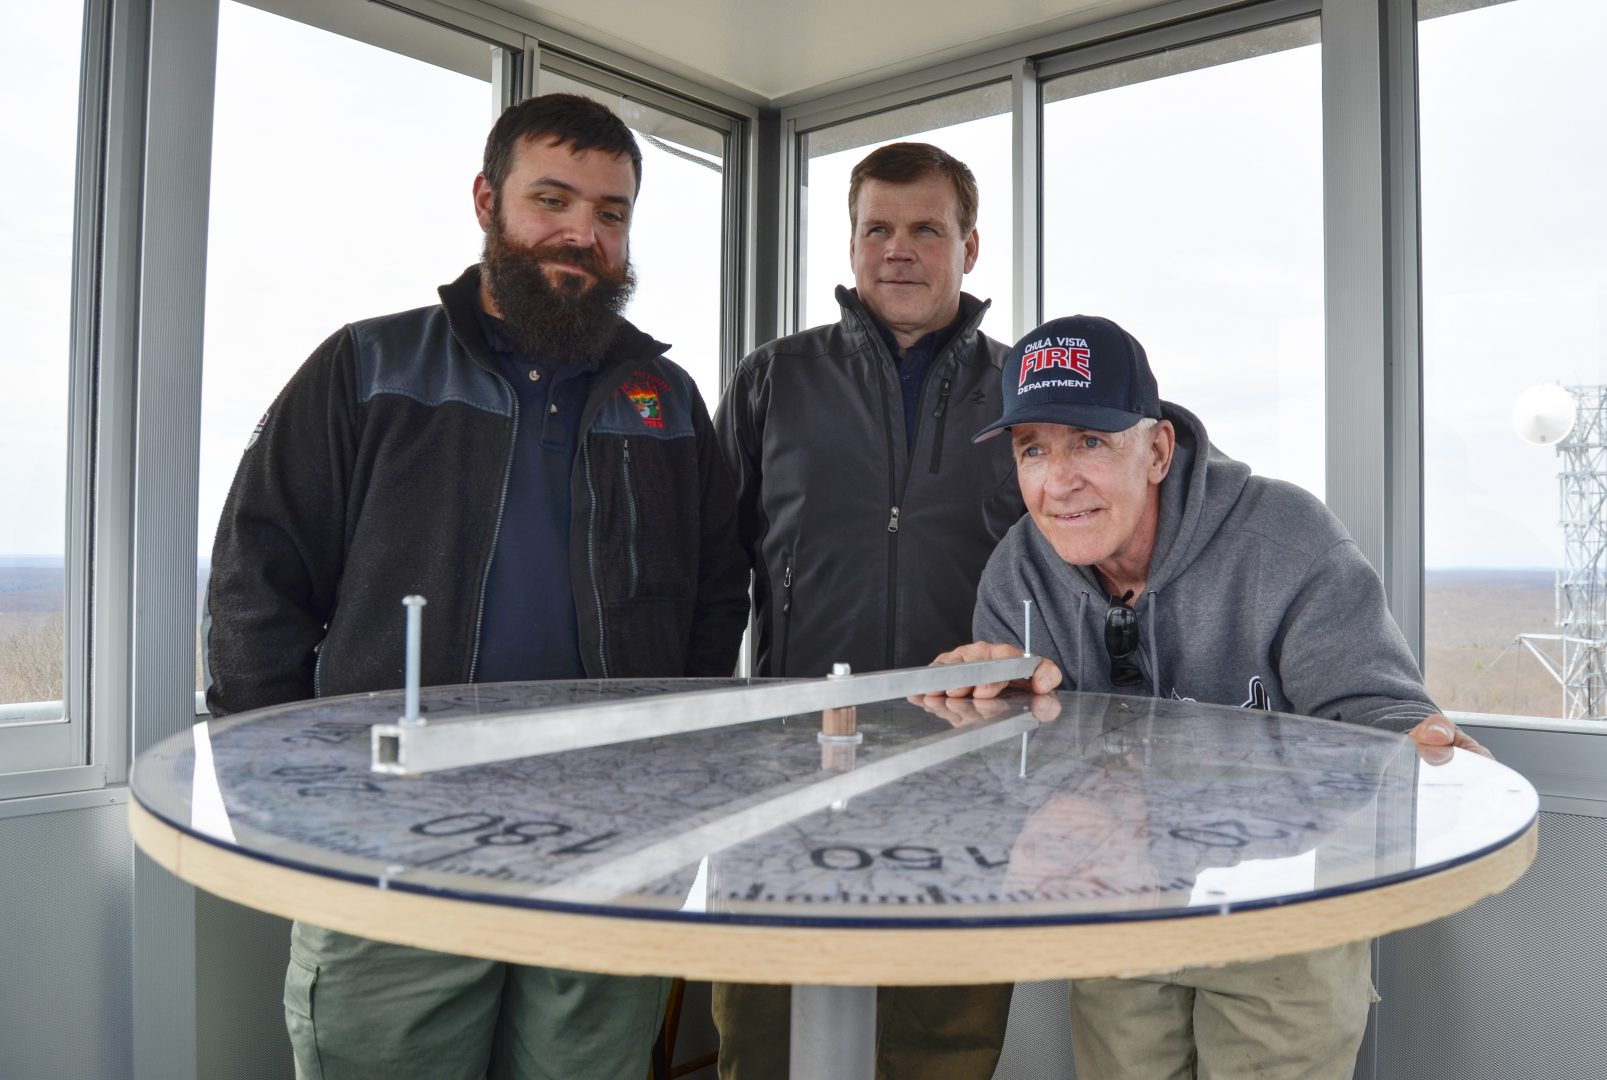 Officials from the Moshannon Forest District gather around the alidade, an instrument used to help personnel staffing lookout towers pinpoint the location of wildfires. From left to right, Joe Polaski, John Hecker and Larry Bickel stand in the new Chestnut Ridge tower.